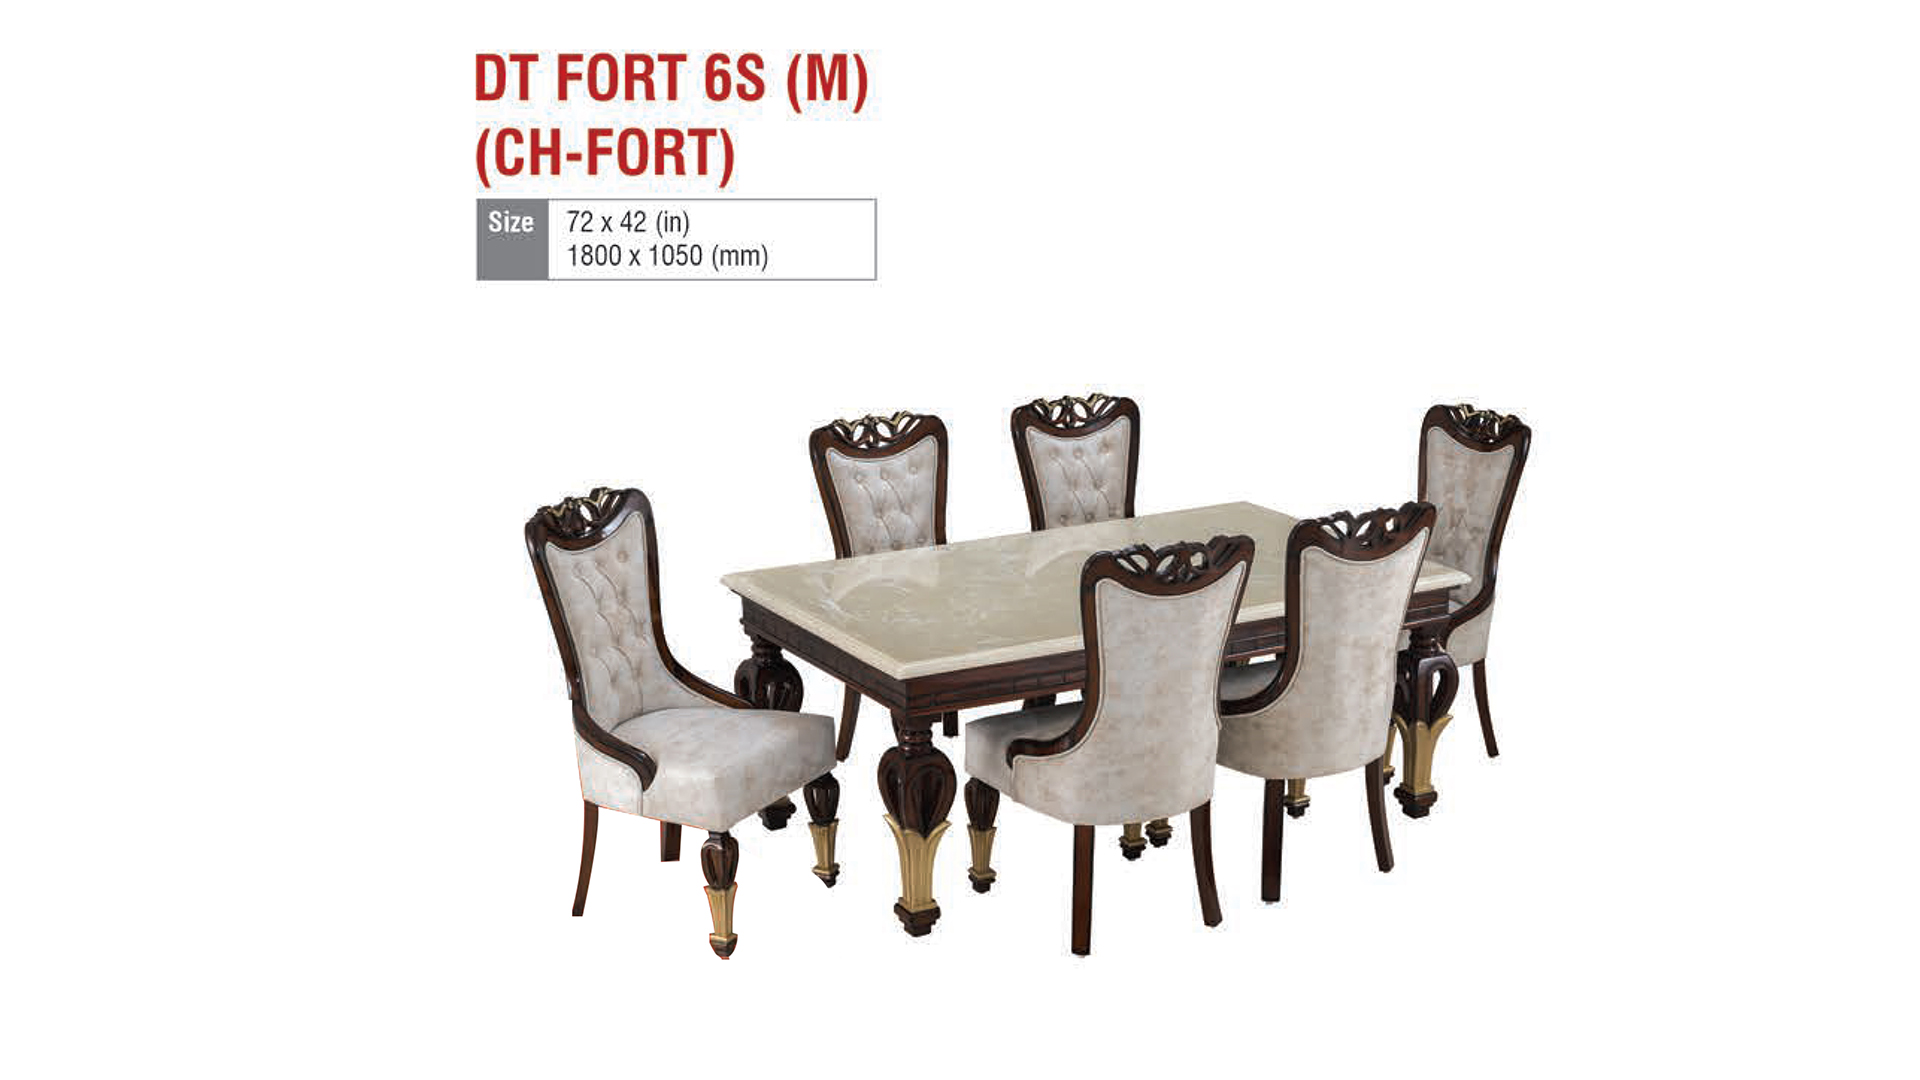 DT FORT 6S (M) (CH-FORT)